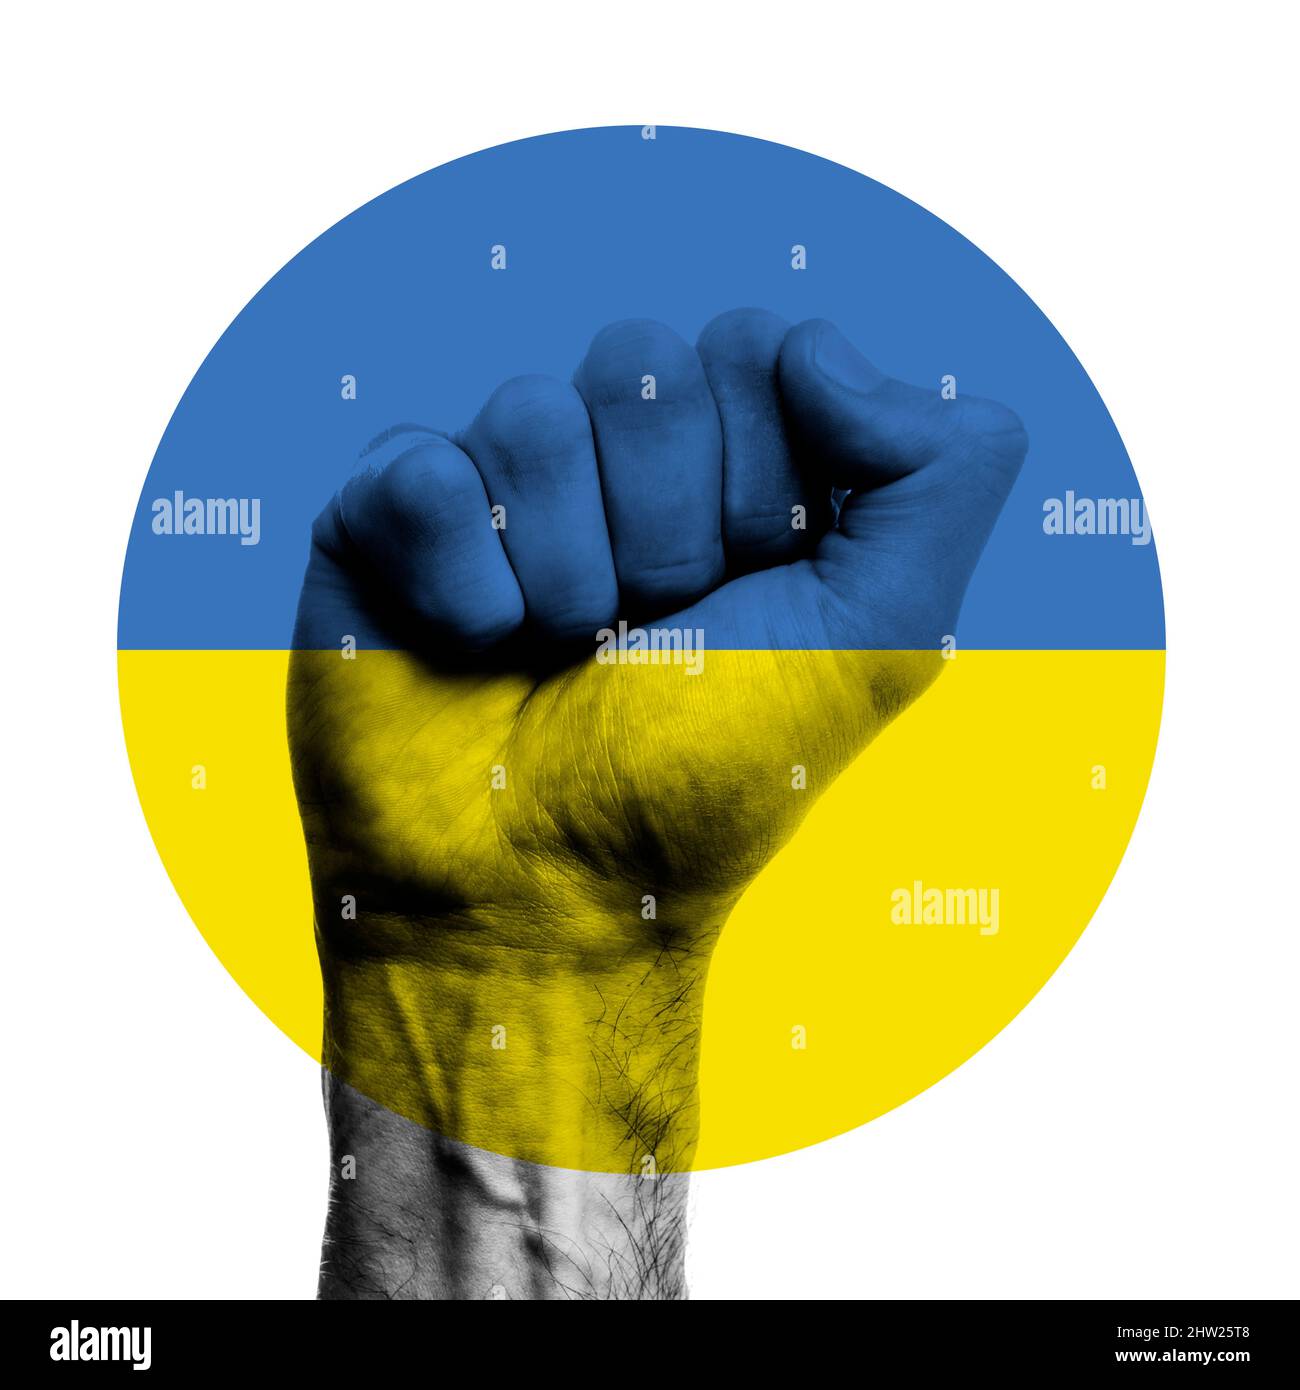 Ukraine flag circle emblem over a clenched fist. Strength, Power, Protest concept Stock Photo